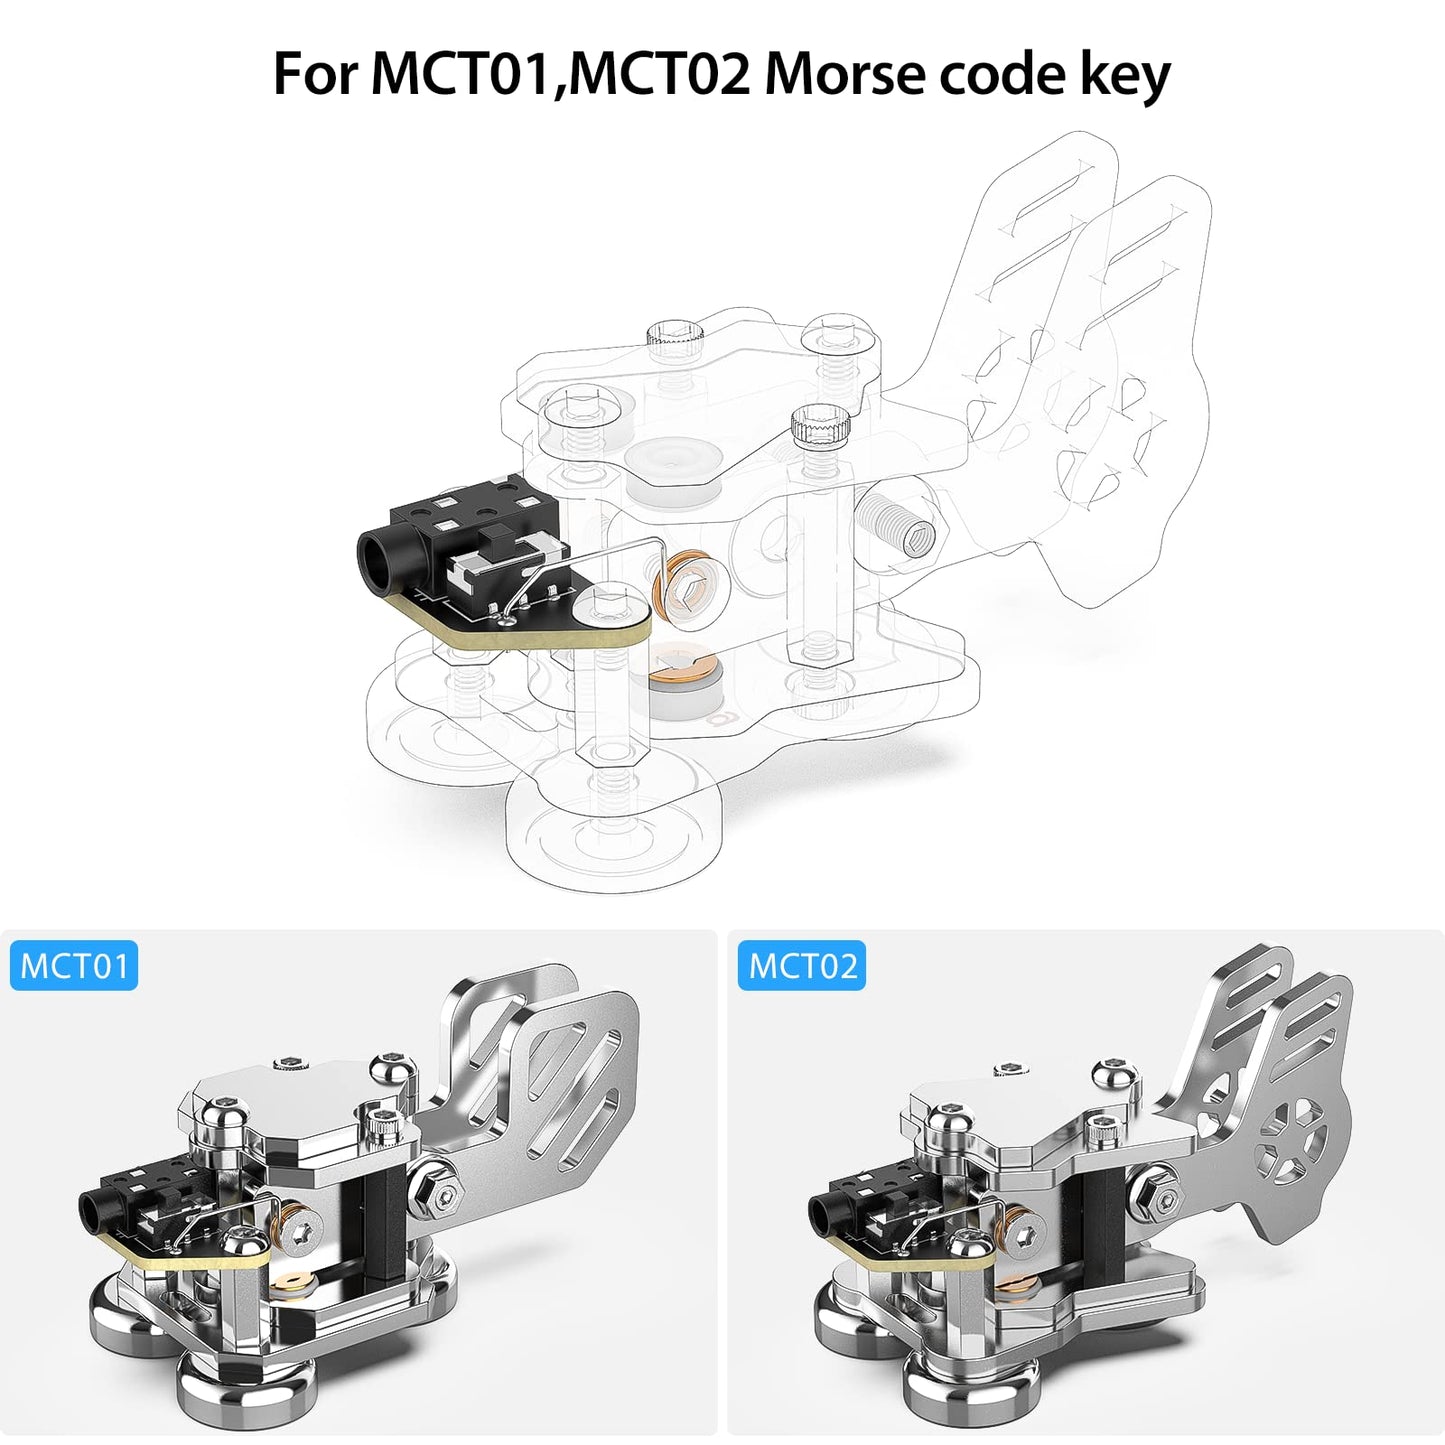 CW Key Replacement for MCT01,MCT02